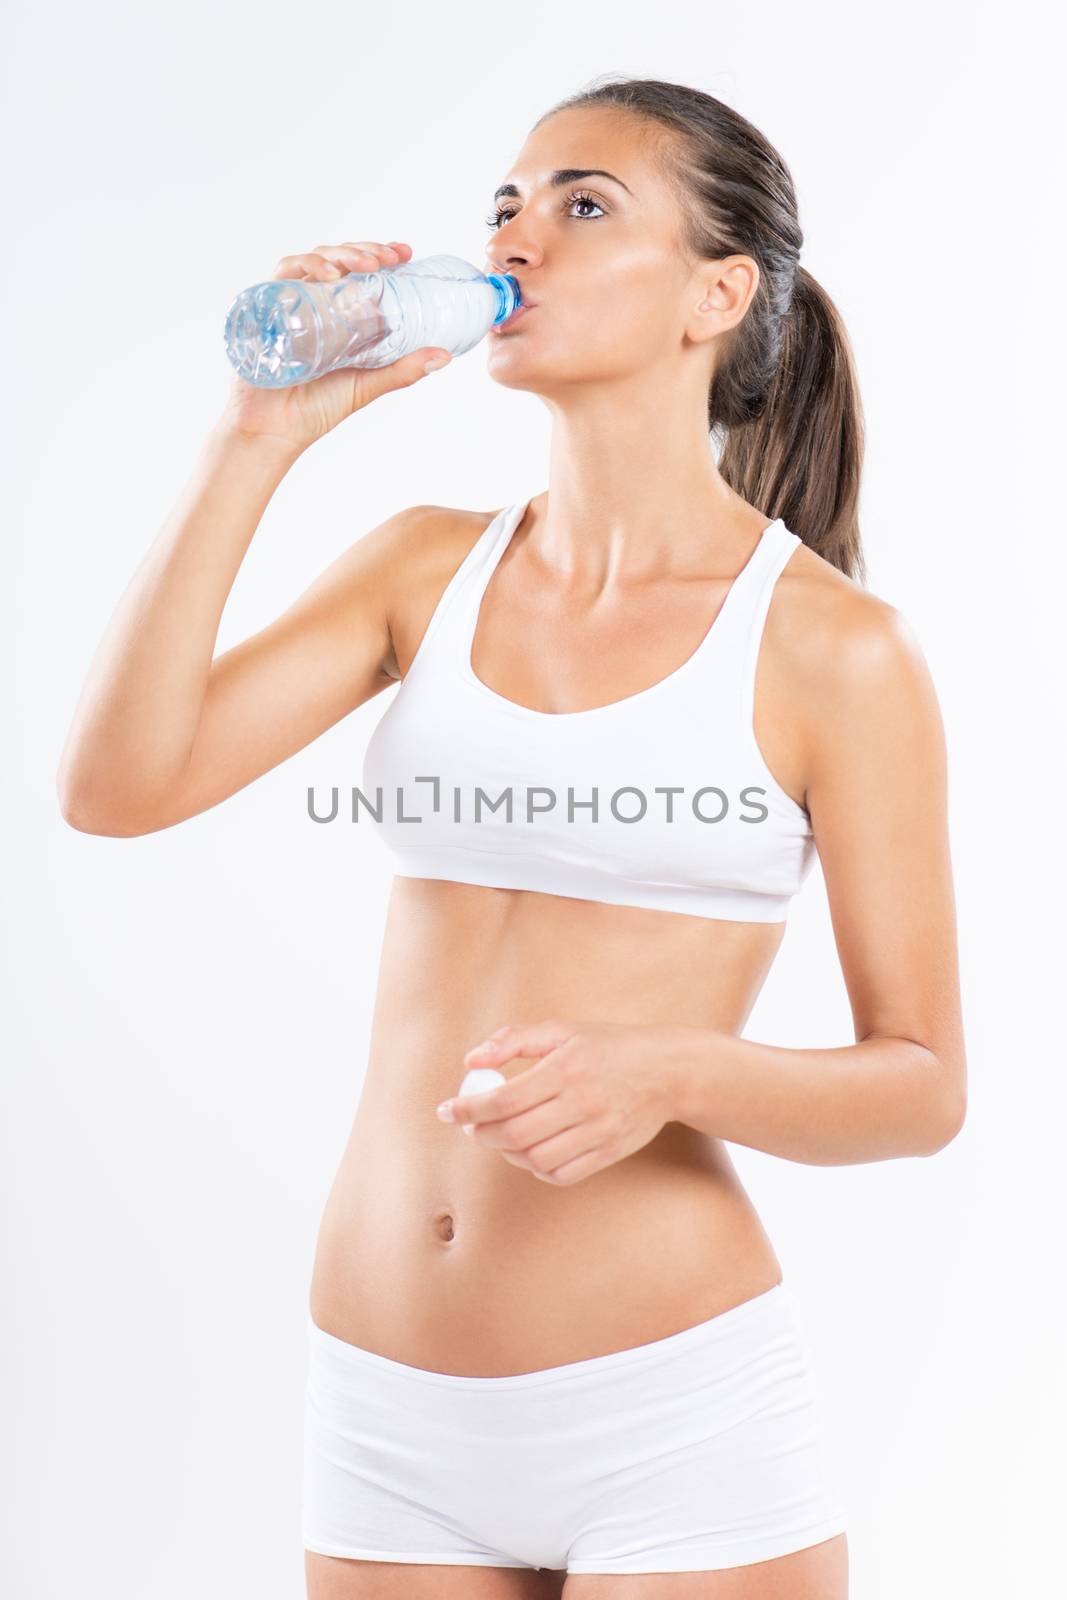 Cute young woman with underwear drinking water.